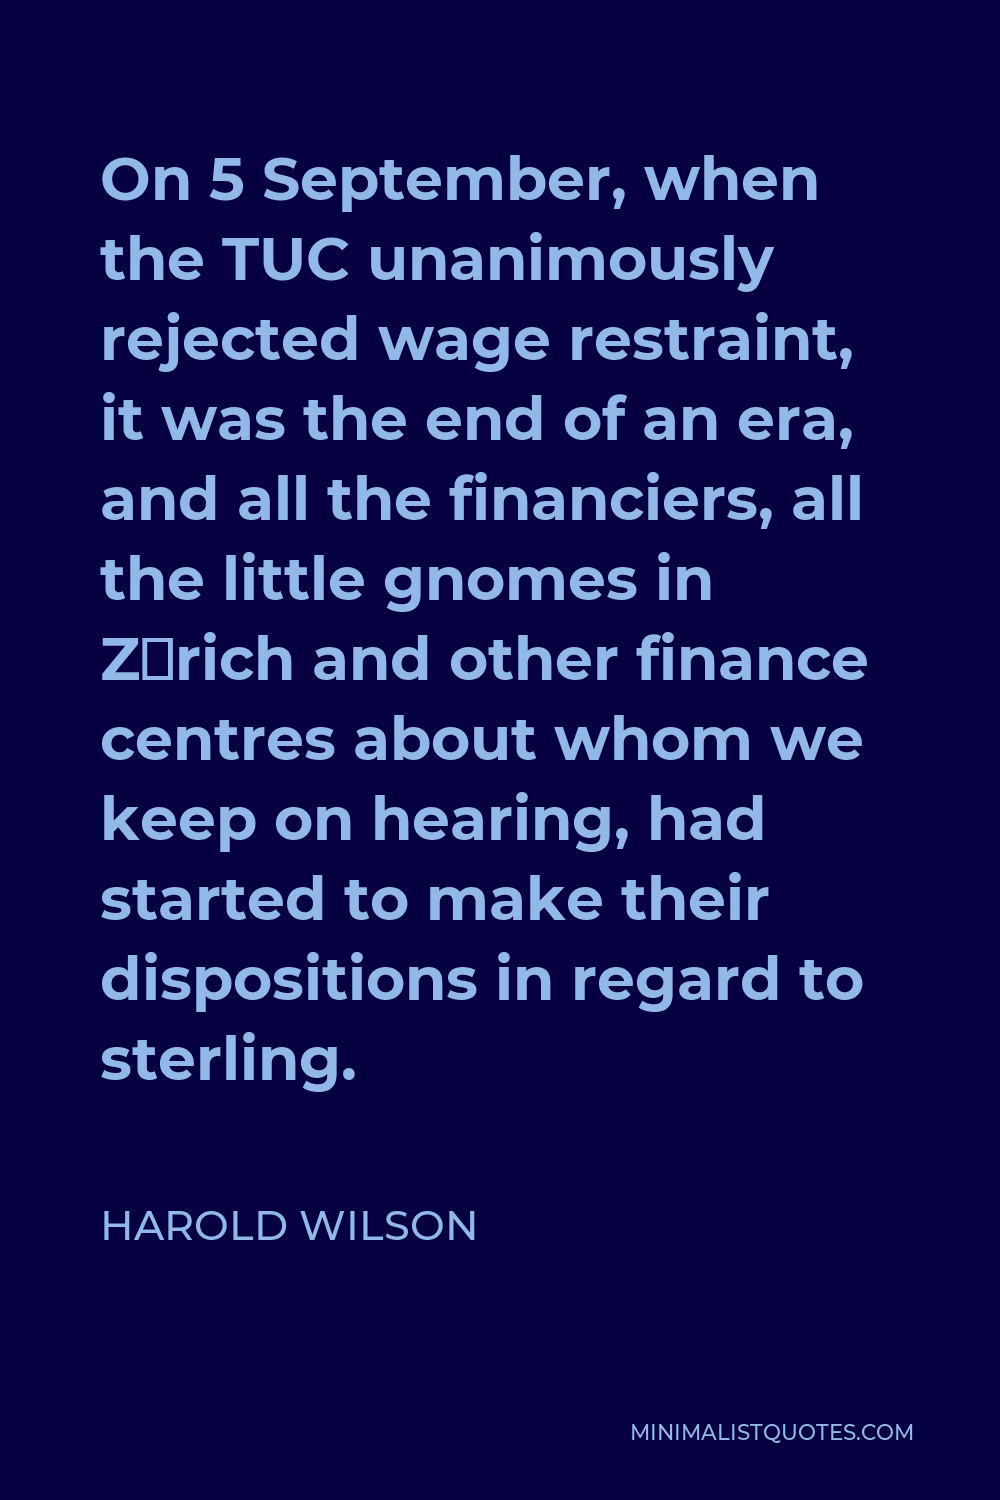 Harold Wilson Quote - On 5 September, when the TUC unanimously rejected wage restraint, it was the end of an era, and all the financiers, all the little gnomes in Zürich and other finance centres about whom we keep on hearing, had started to make their dispositions in regard to sterling.